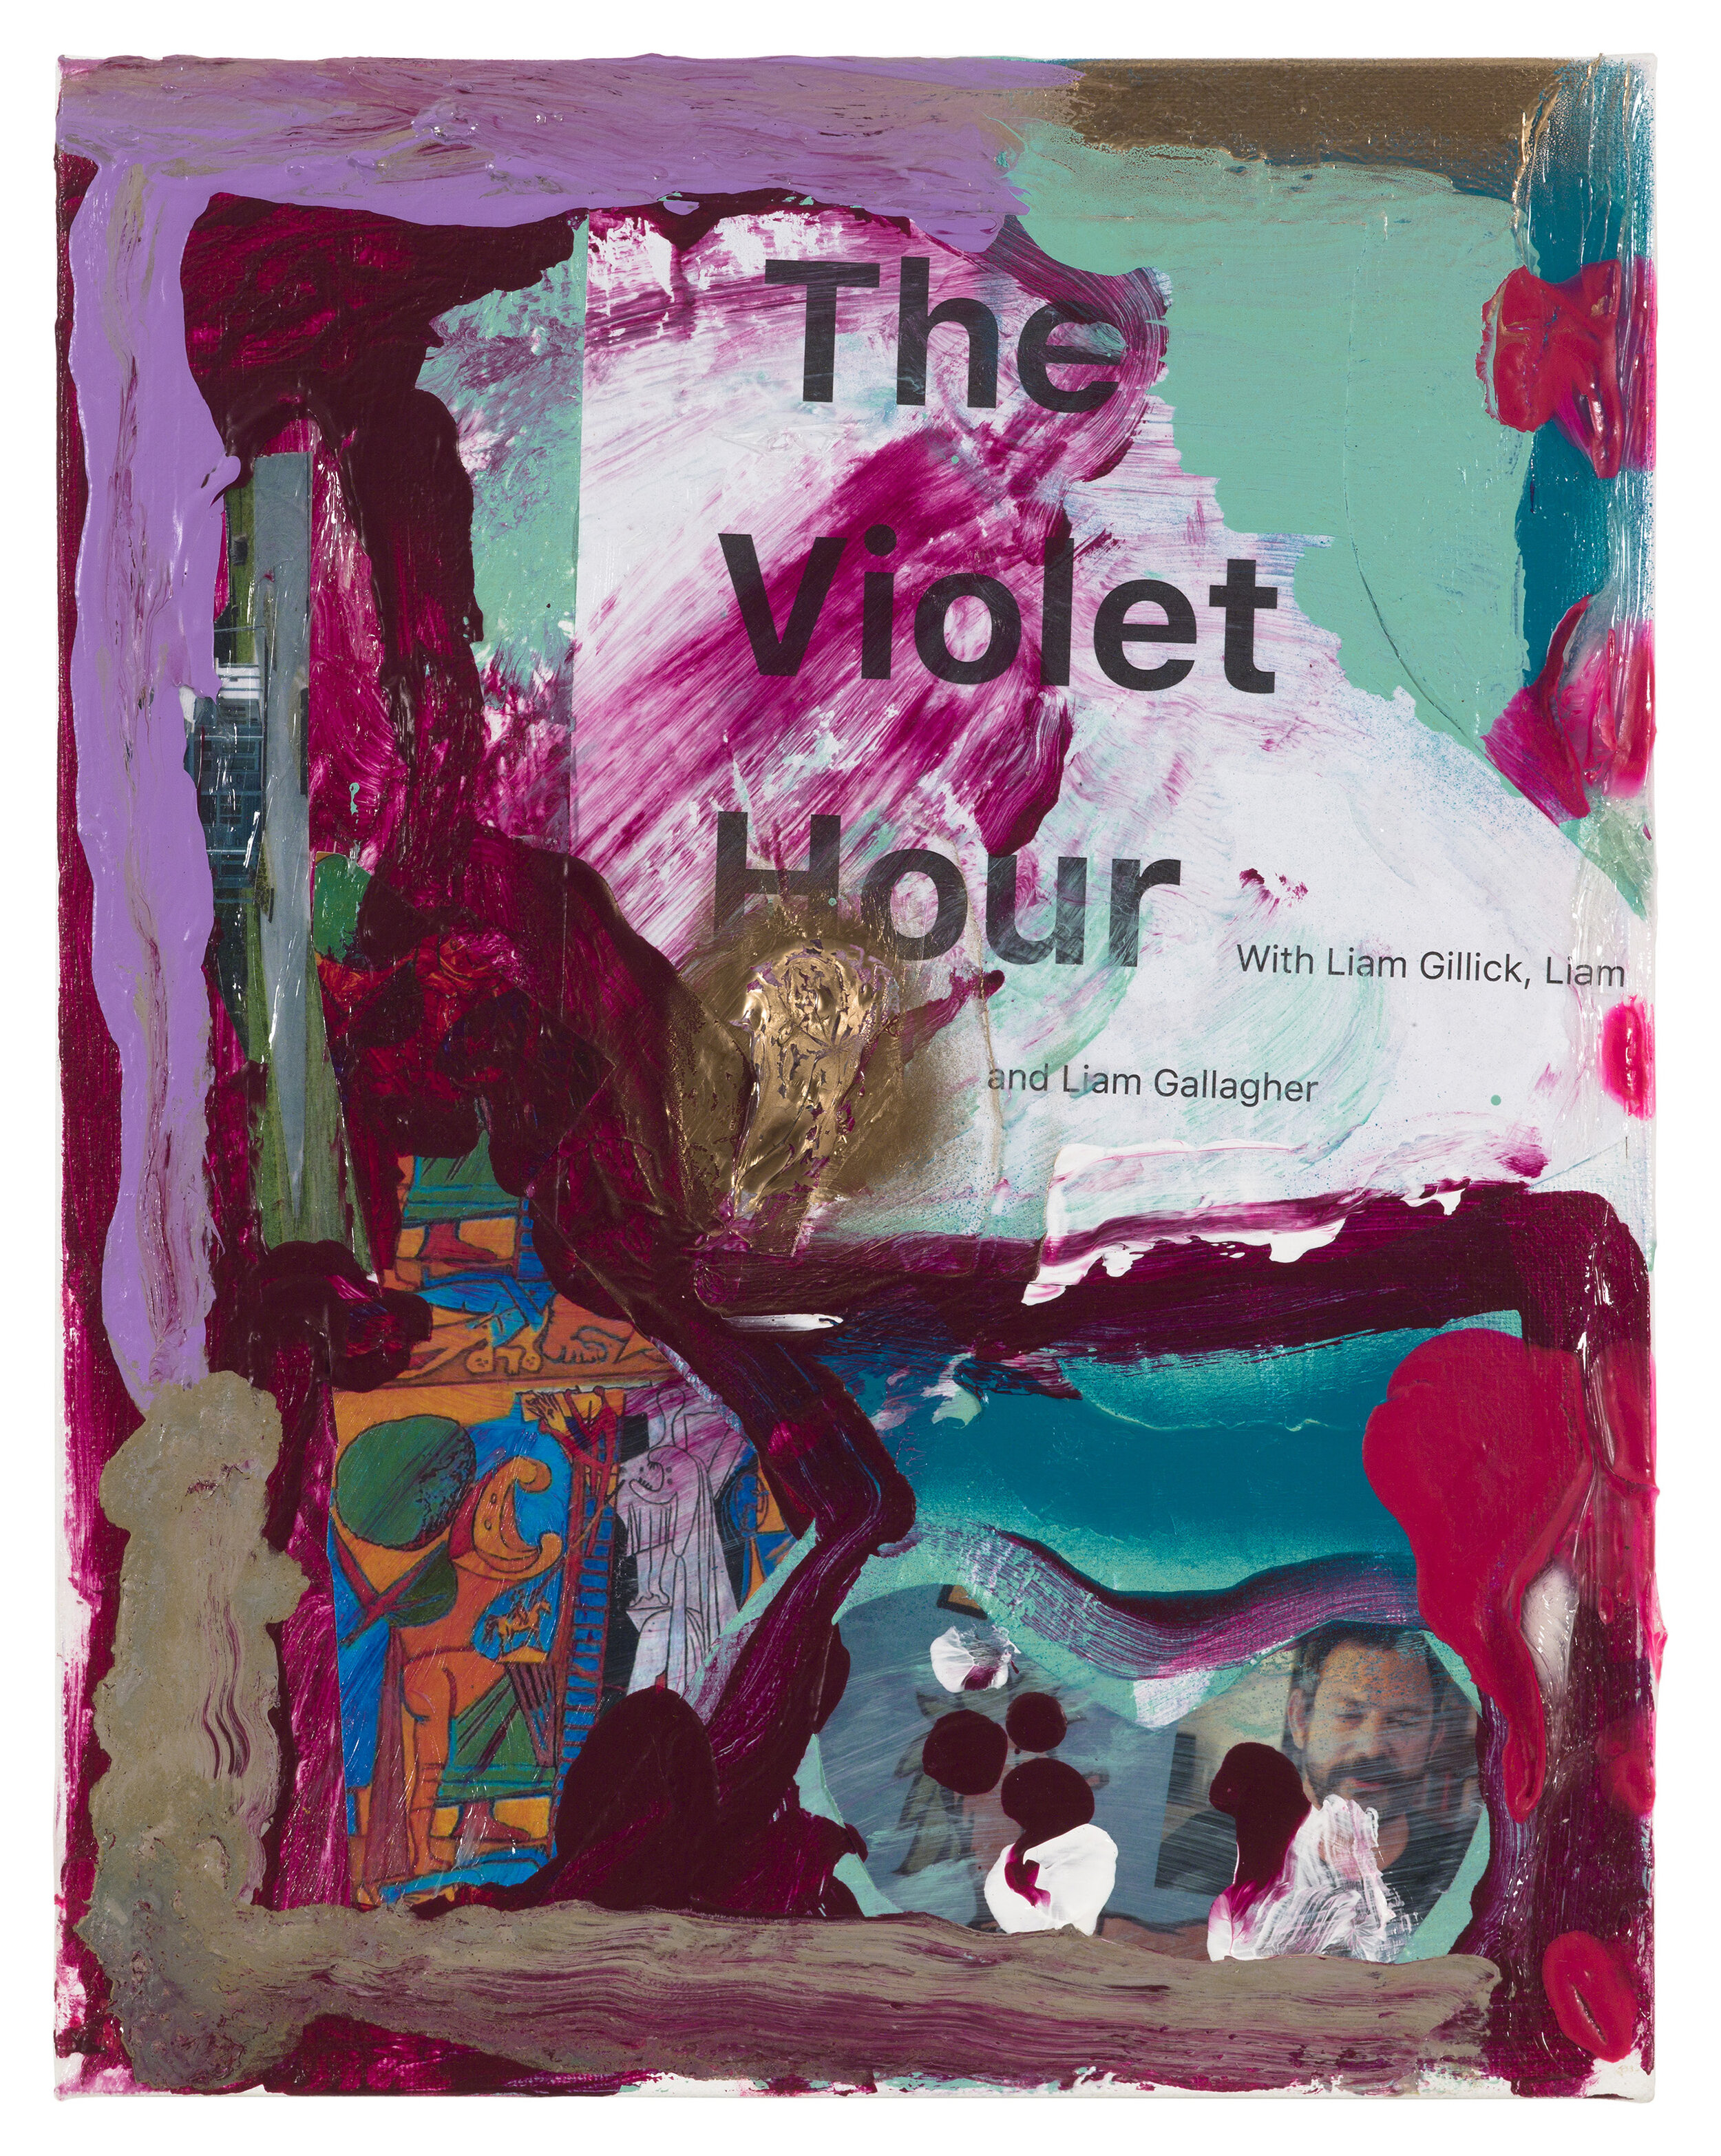  Drew Beattie and Ben Shepard  The Violet Hour   2019 acrylic and collage on canvas 14 x 11 inches 